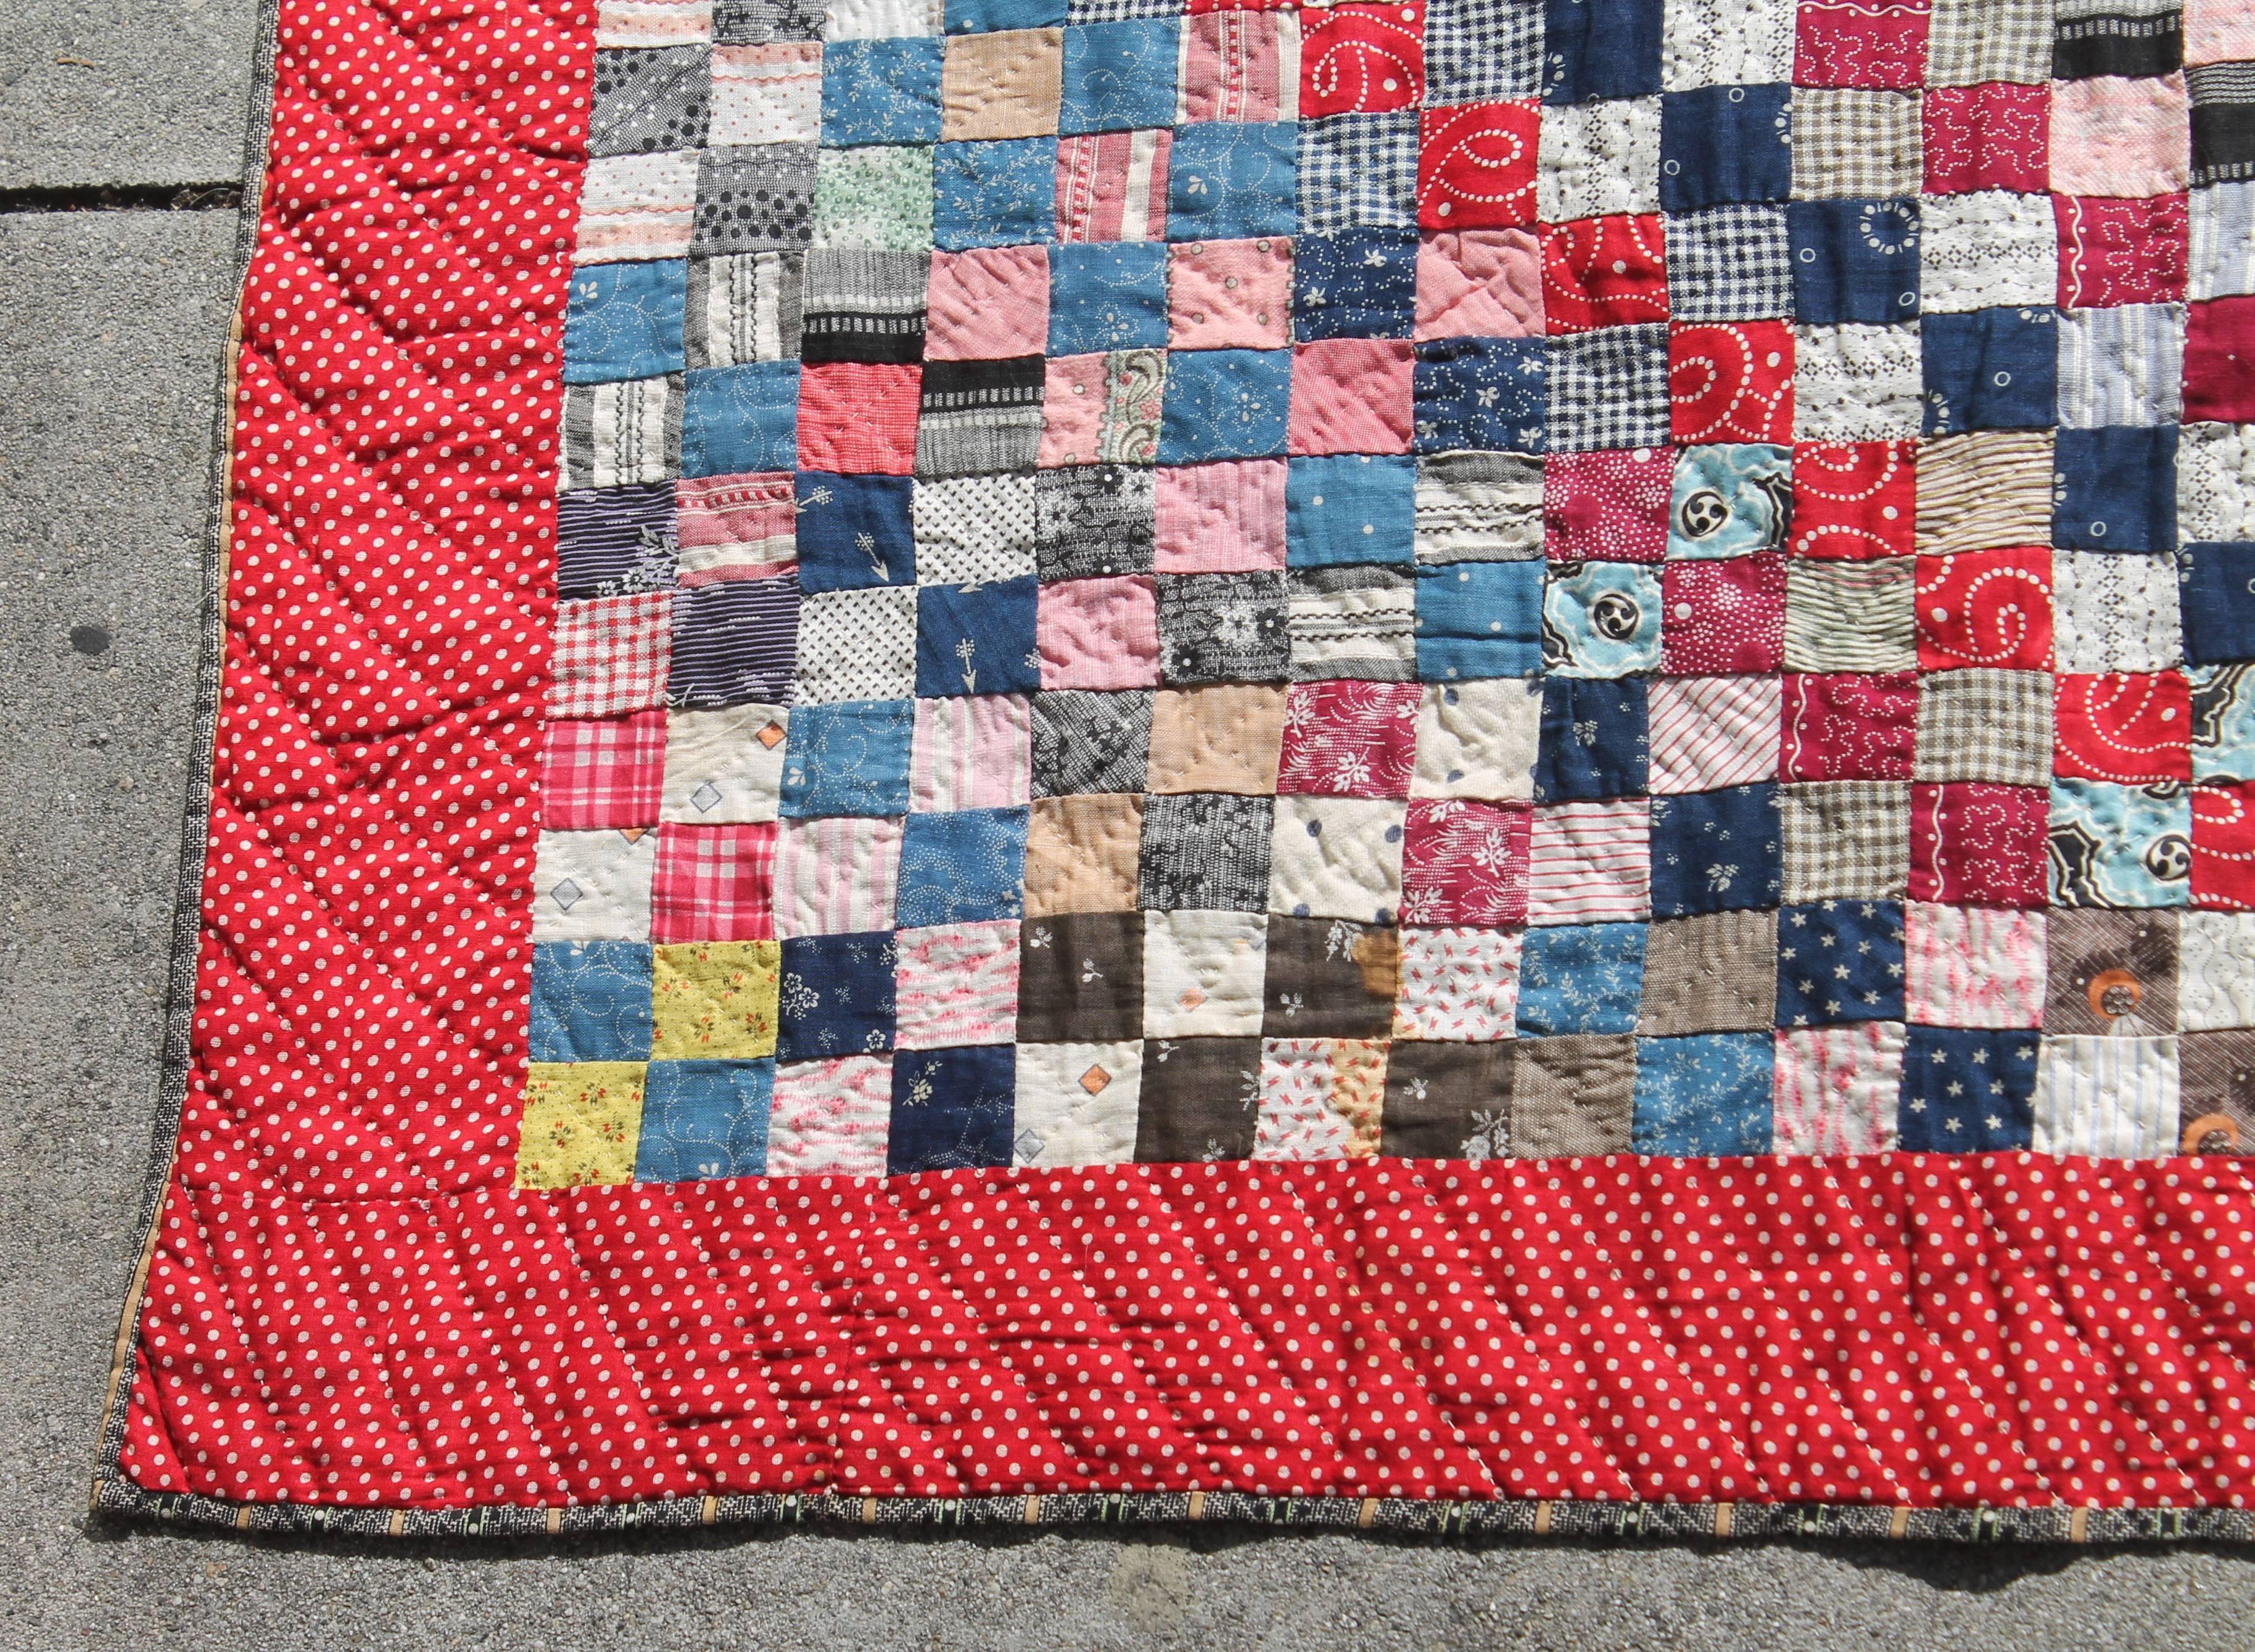 This fine 19th century tiny pieced postage stamp quilt is in pristine condition. There are thousands of pieces and multi colors. This fine museum quality quilt was found in a estate in Pennsylvania.